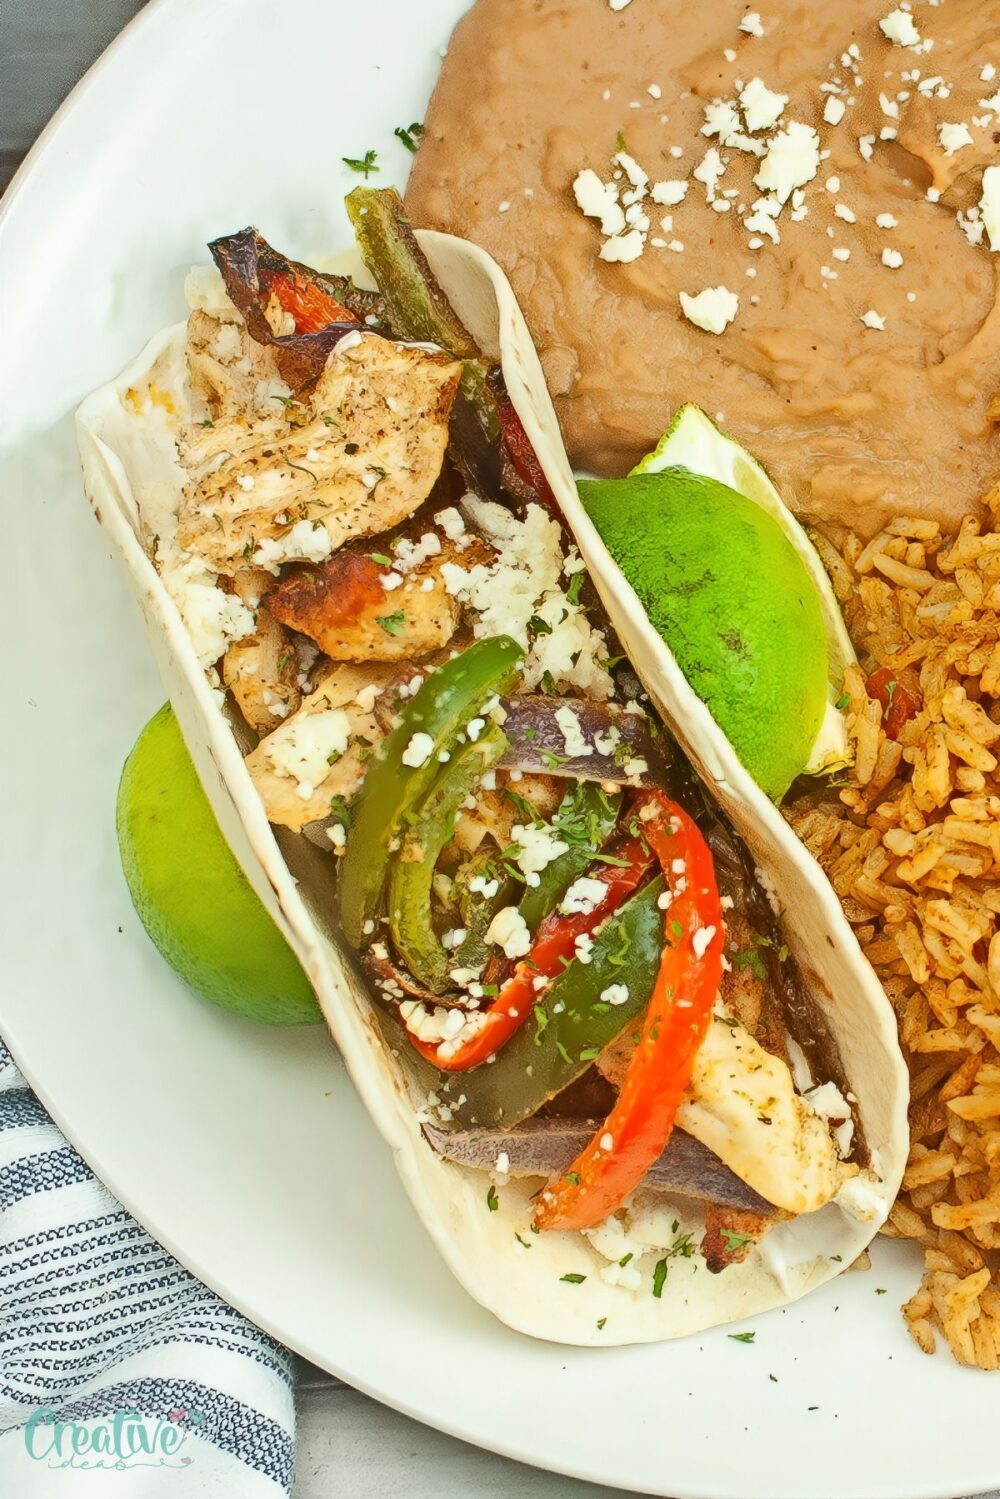 Get ready for a flavor explosion with these quick and delicious chicken fajitas in air fryer! The perfect weeknight meal solution.